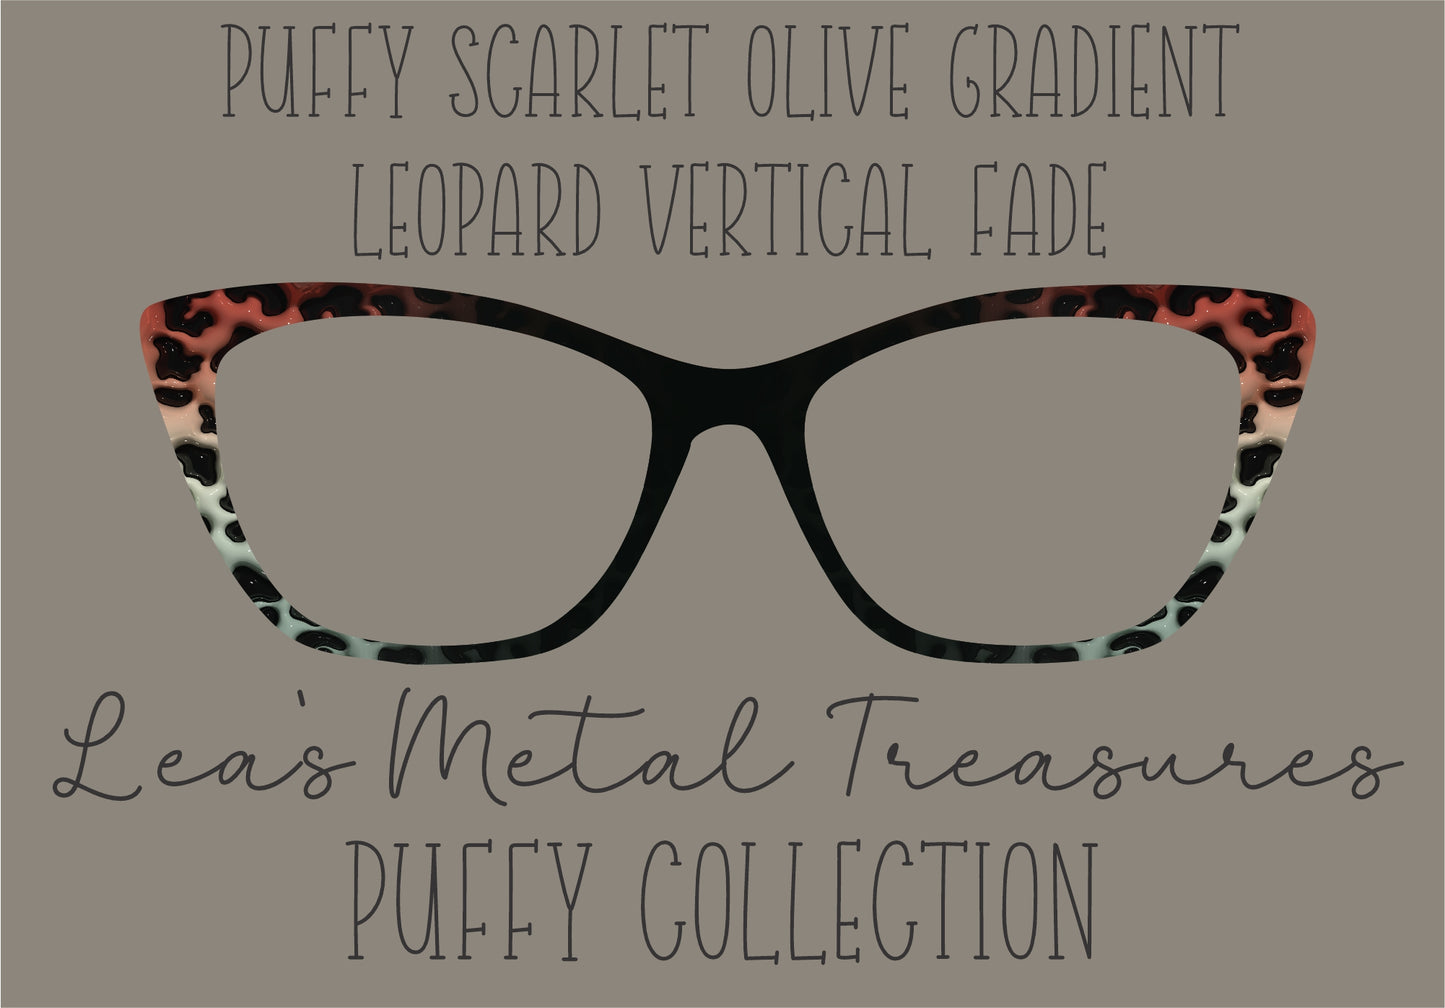 PUFFY SCARLET OLIVE GRADIENT VERTICAL FADE Eyewear Frame Toppers COMES WITH MAGNETS